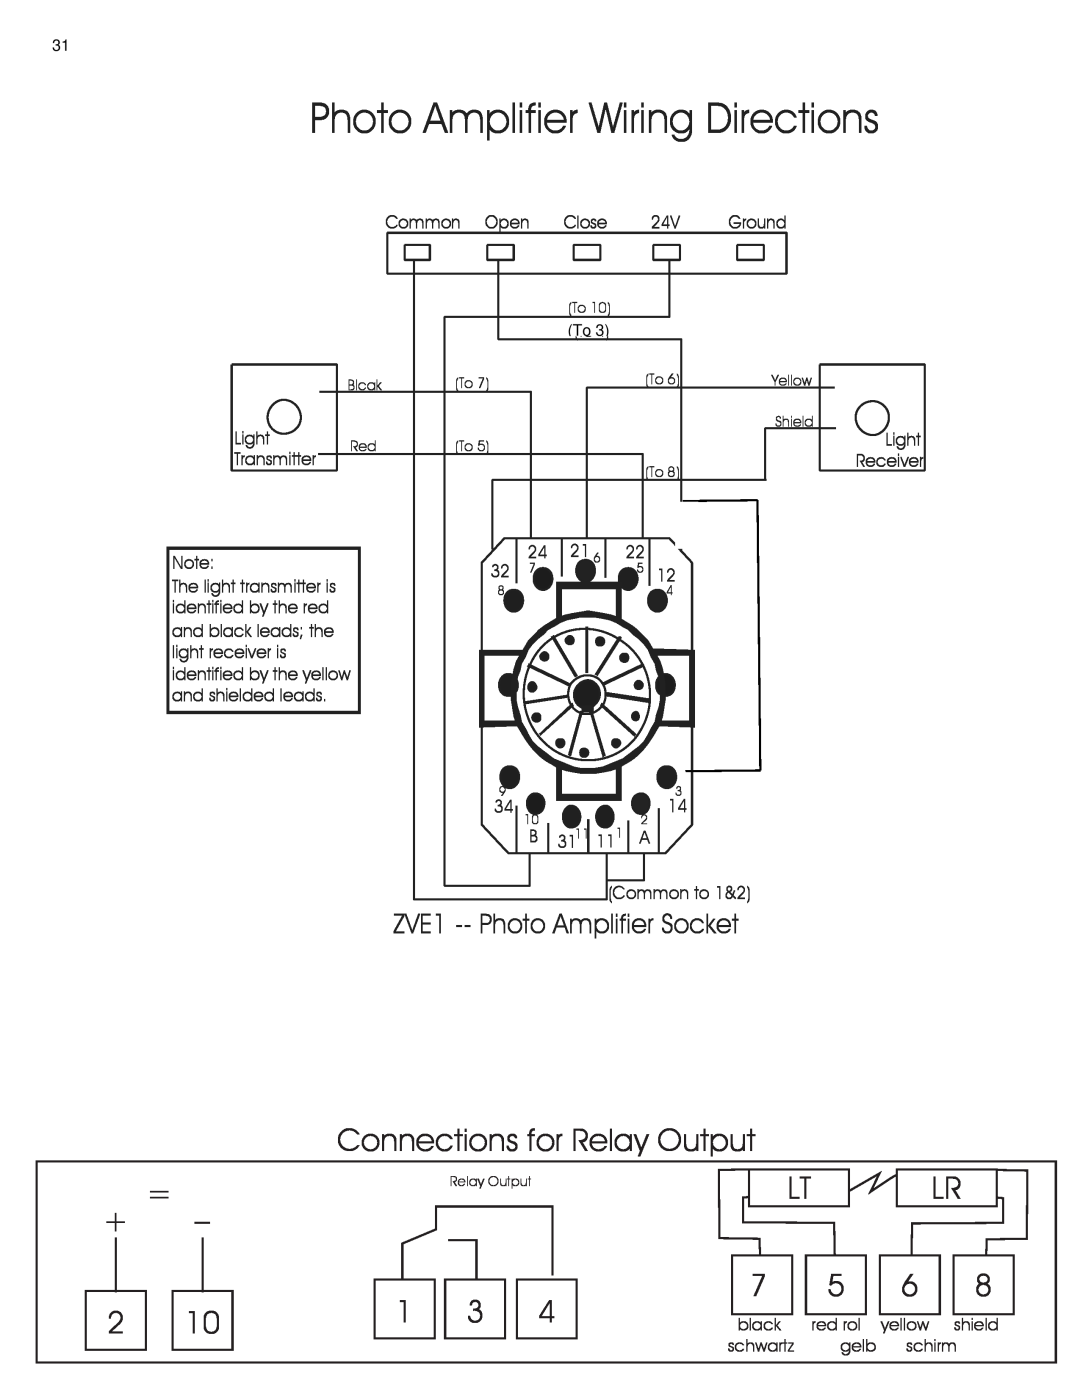 Ultimate Products UP-206 manual Connections for Relay Output, = +, Photo Amplifier Wiring Directions 